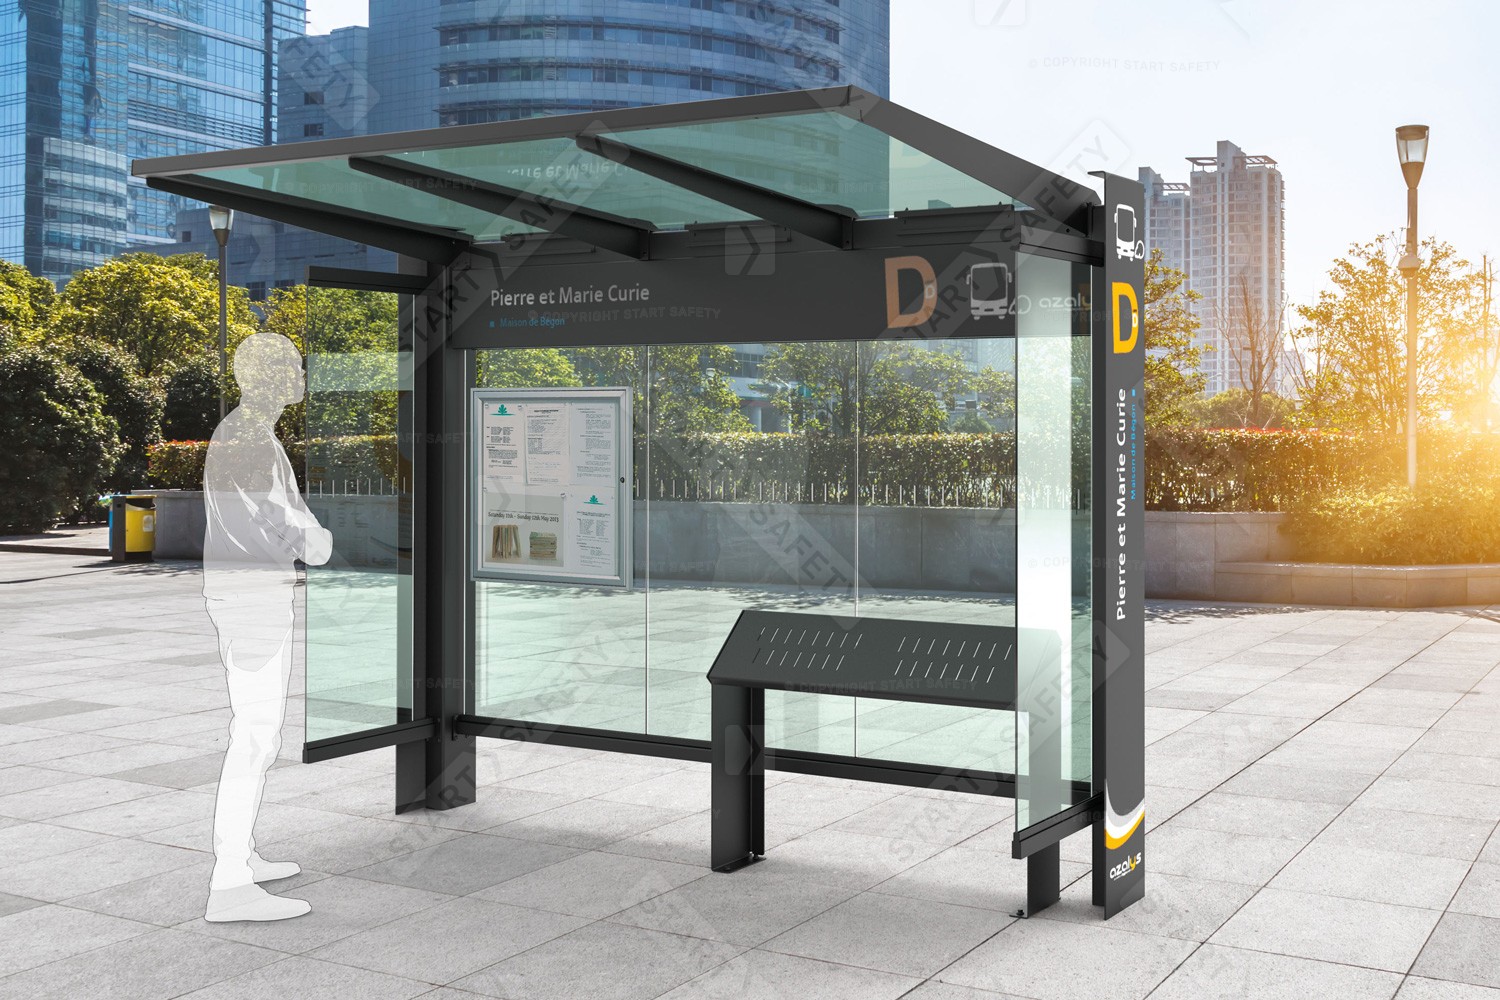 Procity Kube Bus Shelter Installed With Side Cladding and Perch Bench